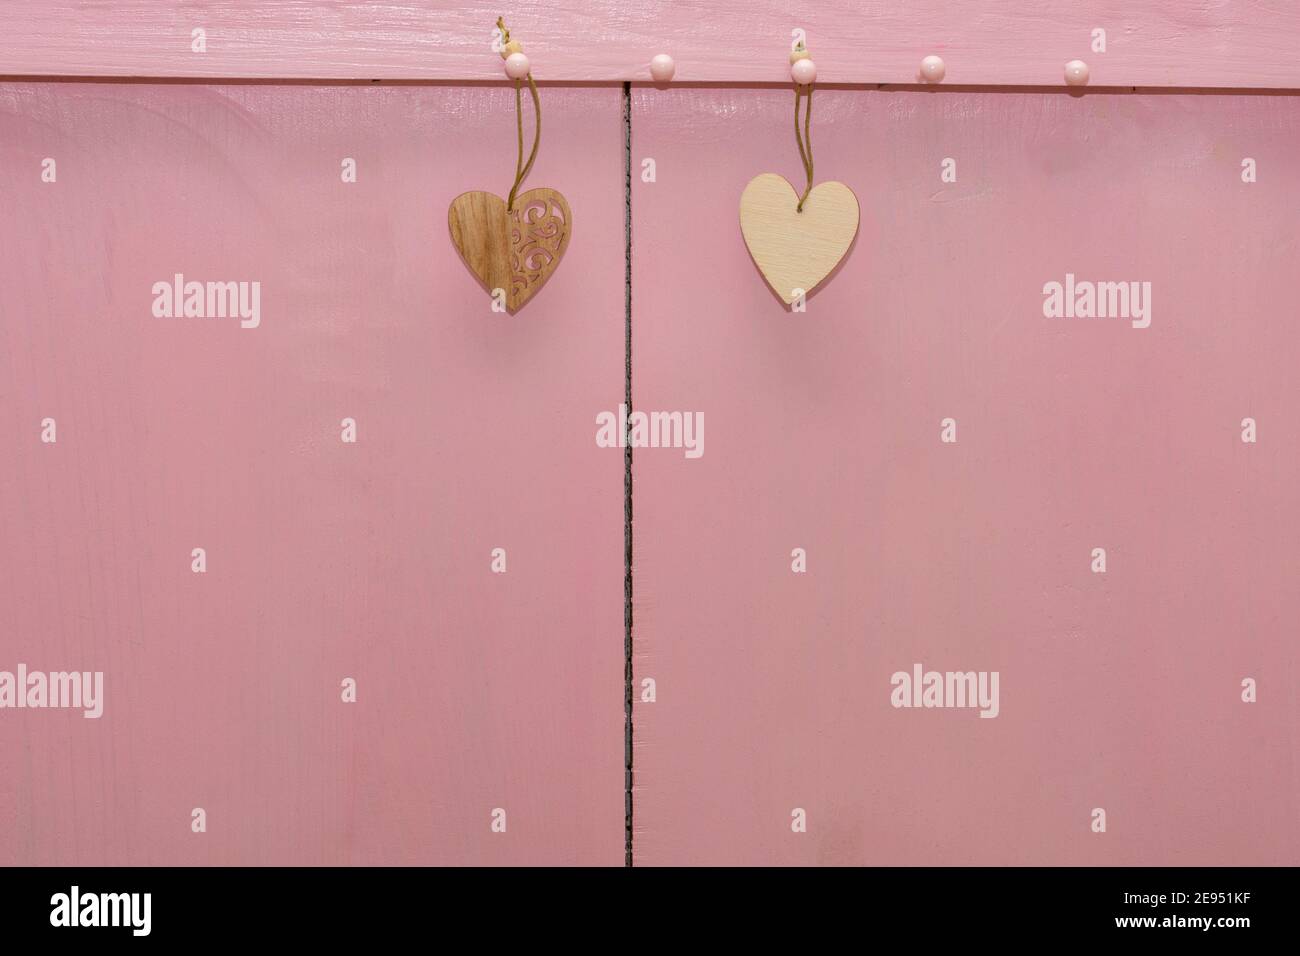 Two small hearts made of wood hang ropes on pink background. Copy space, place for your text. Valentin's day concept, love, wedding. Stock Photo